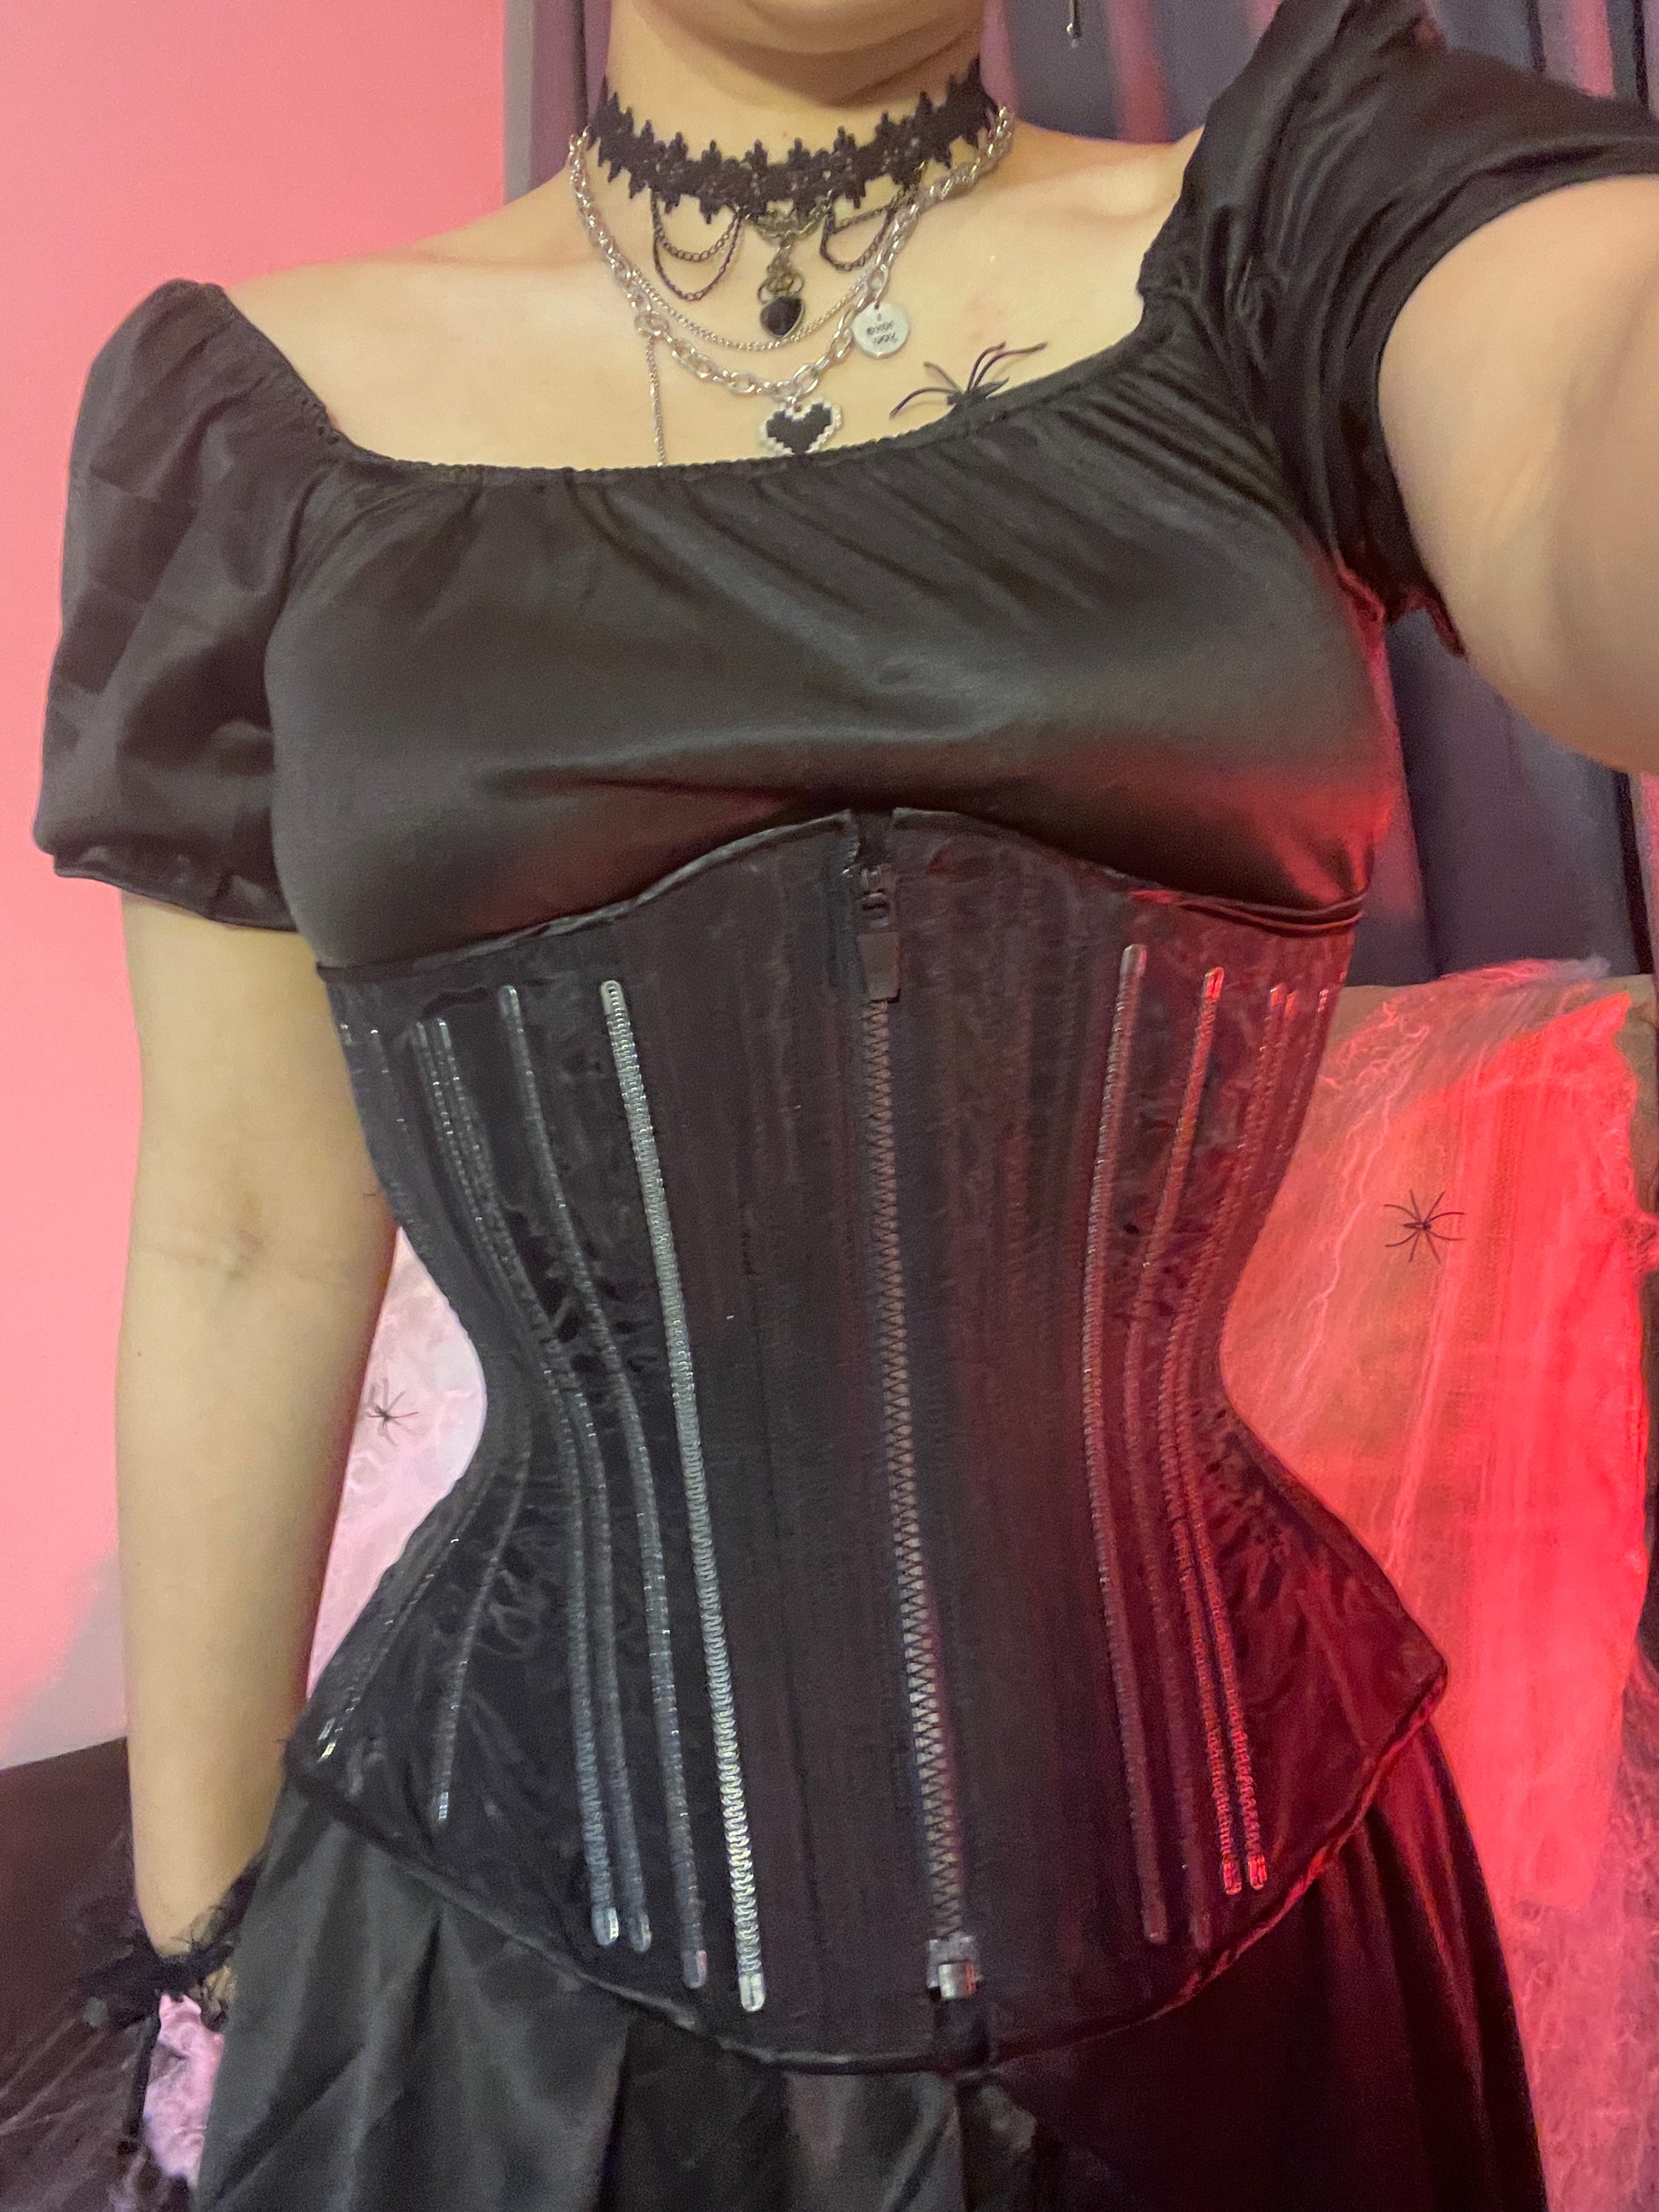 My first (actually fitting) corset! Stealthing under work clothes